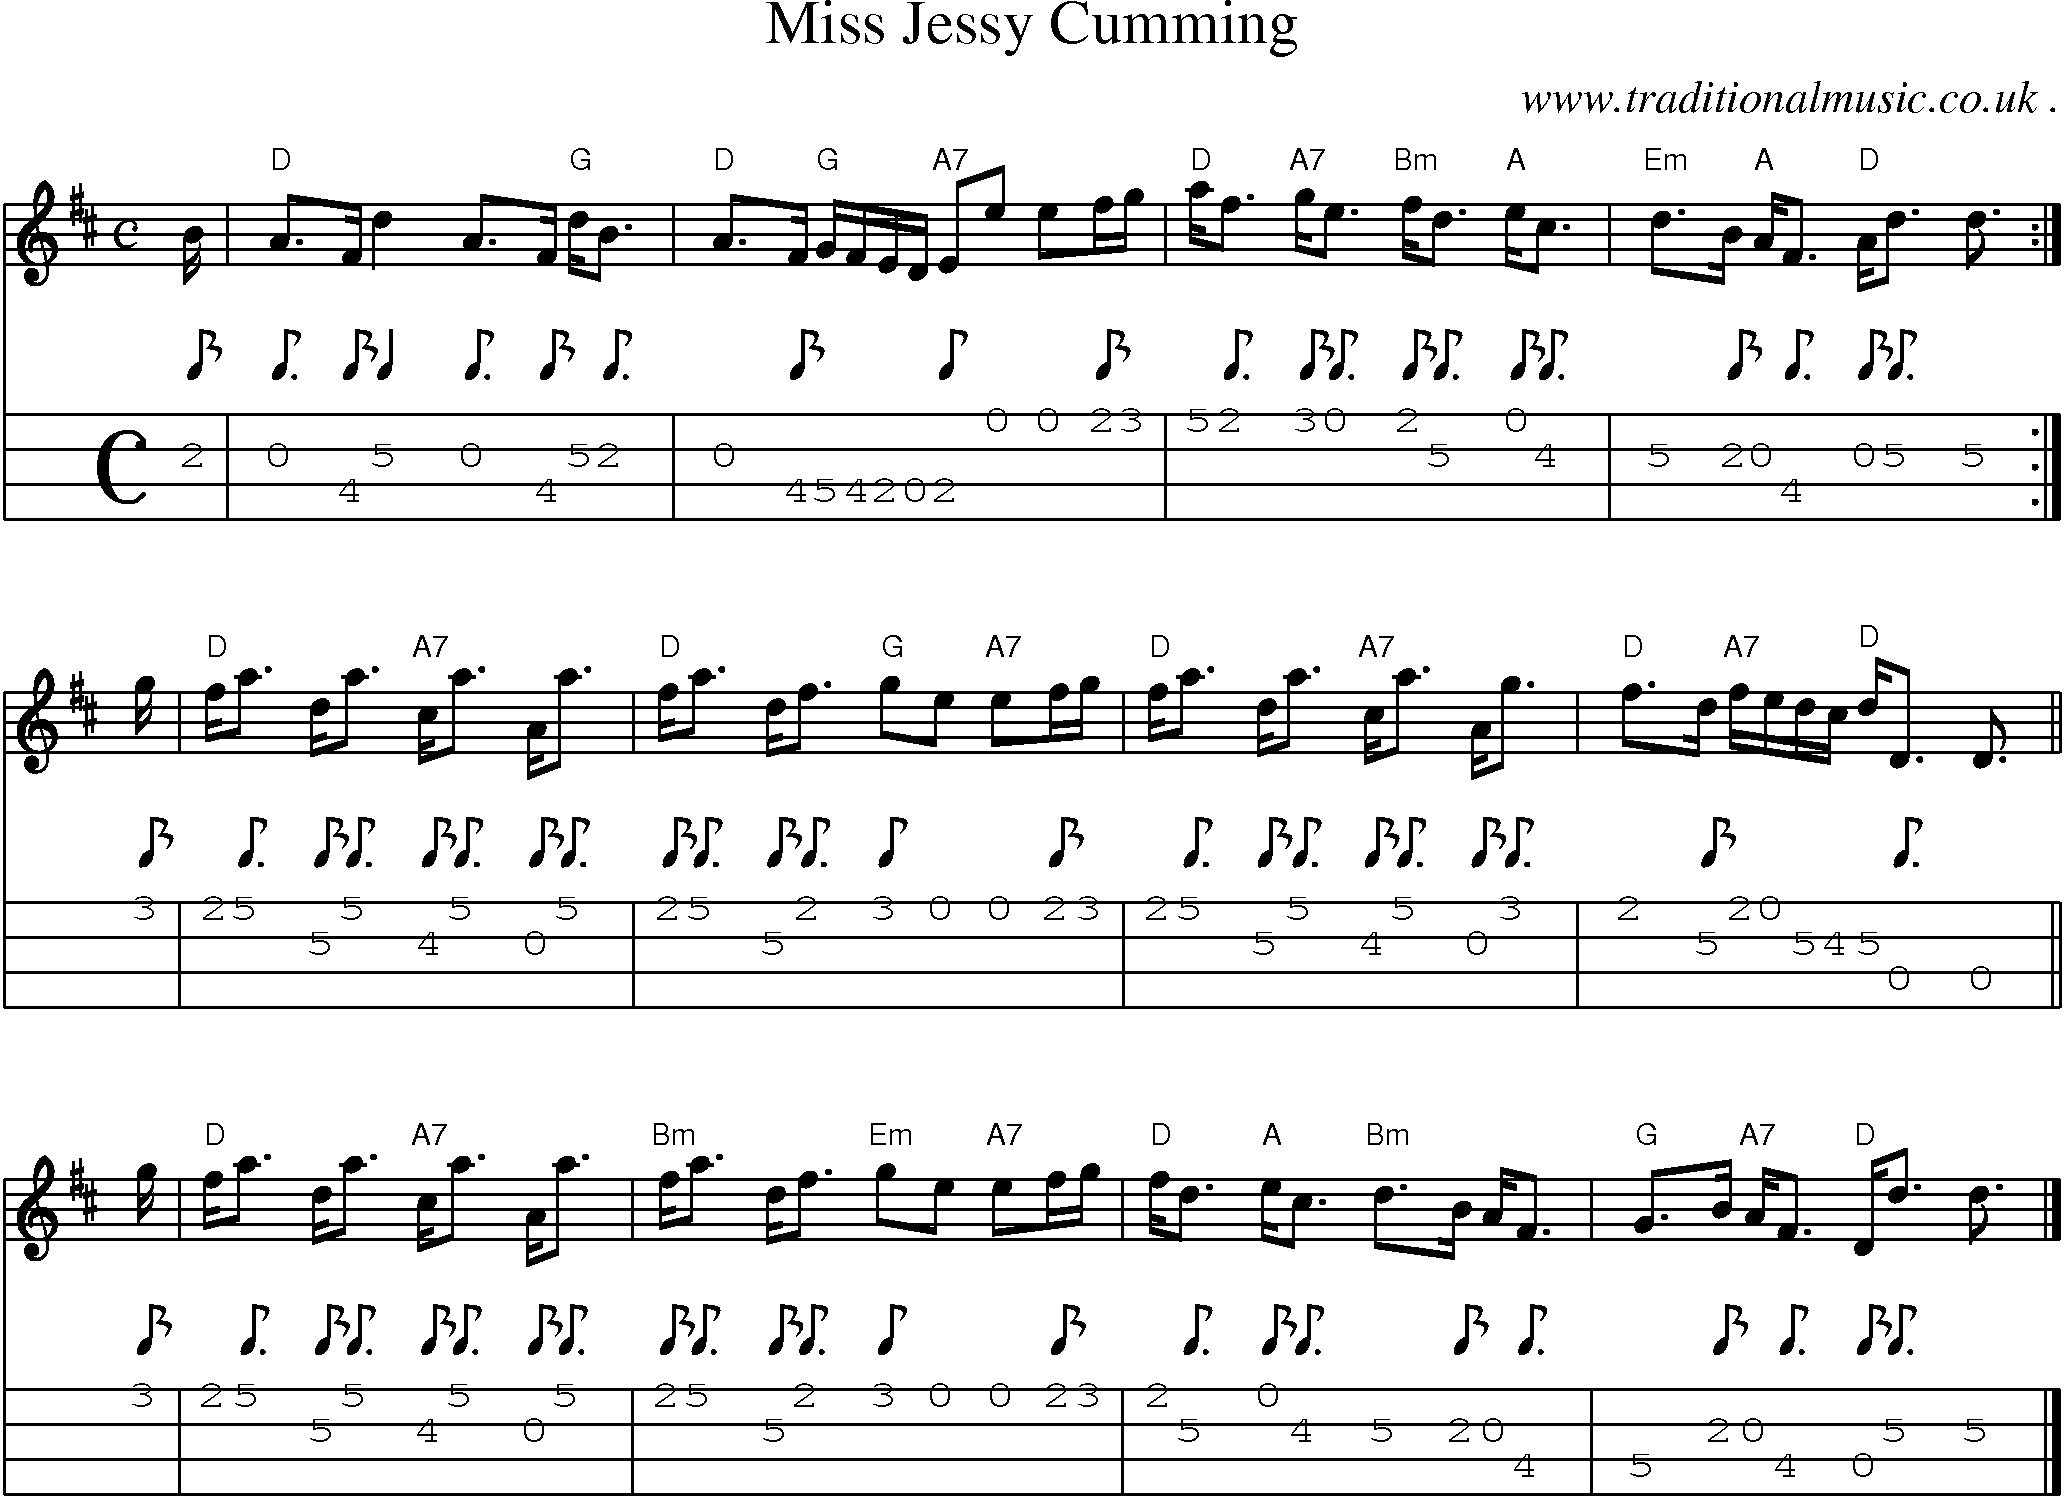 Sheet-music  score, Chords and Mandolin Tabs for Miss Jessy Cumming